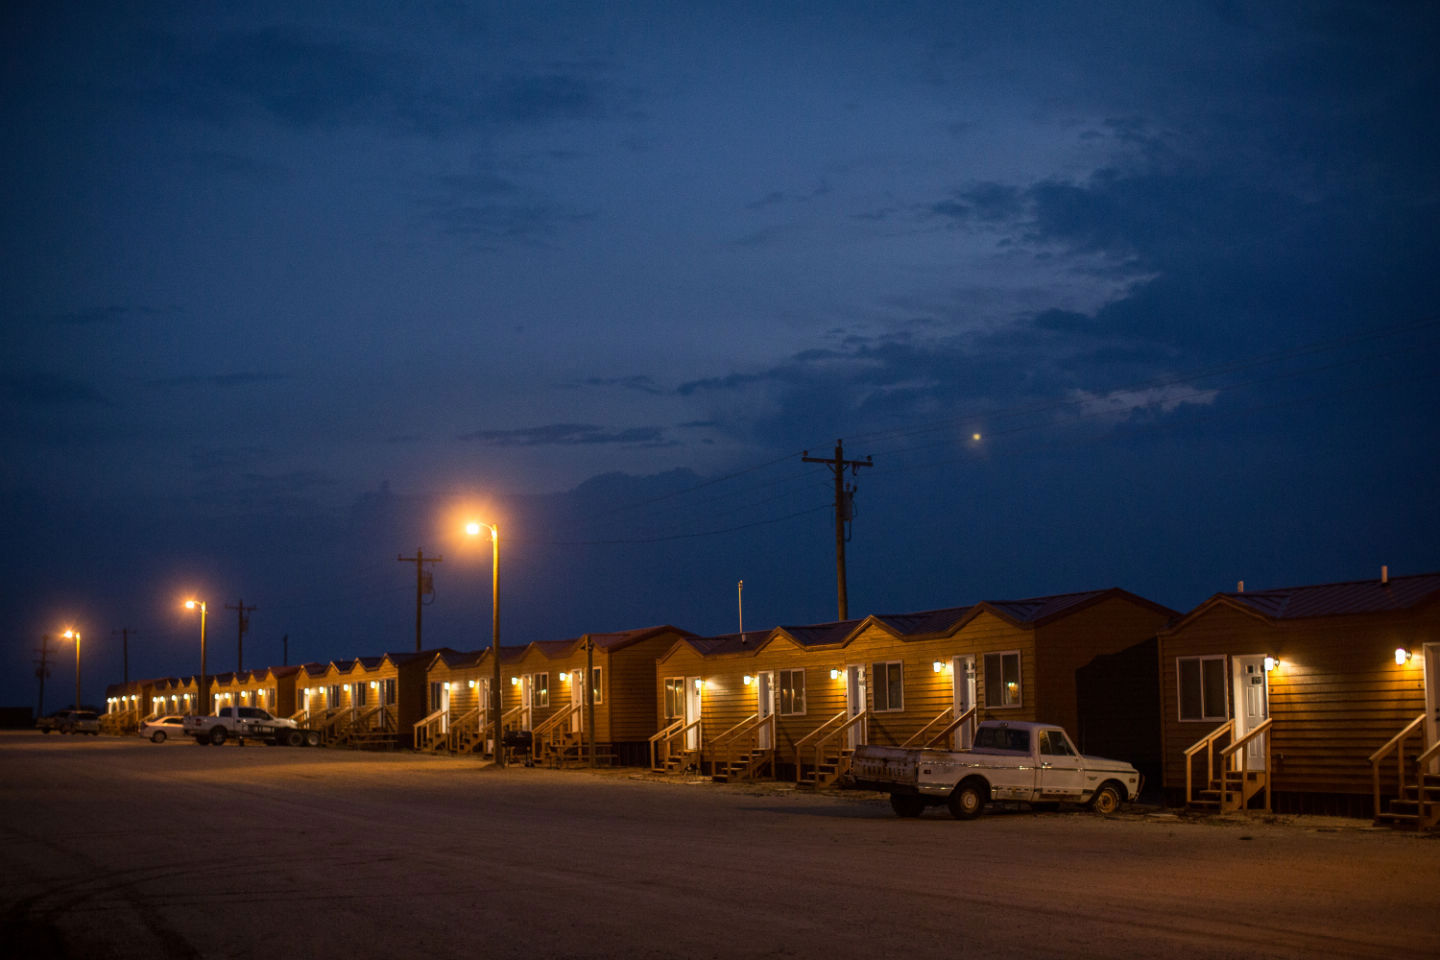 "Man camps," temporary communities for oilfield workers, are explored in The Texas Tribune's crowdfunded "The Shale Life"